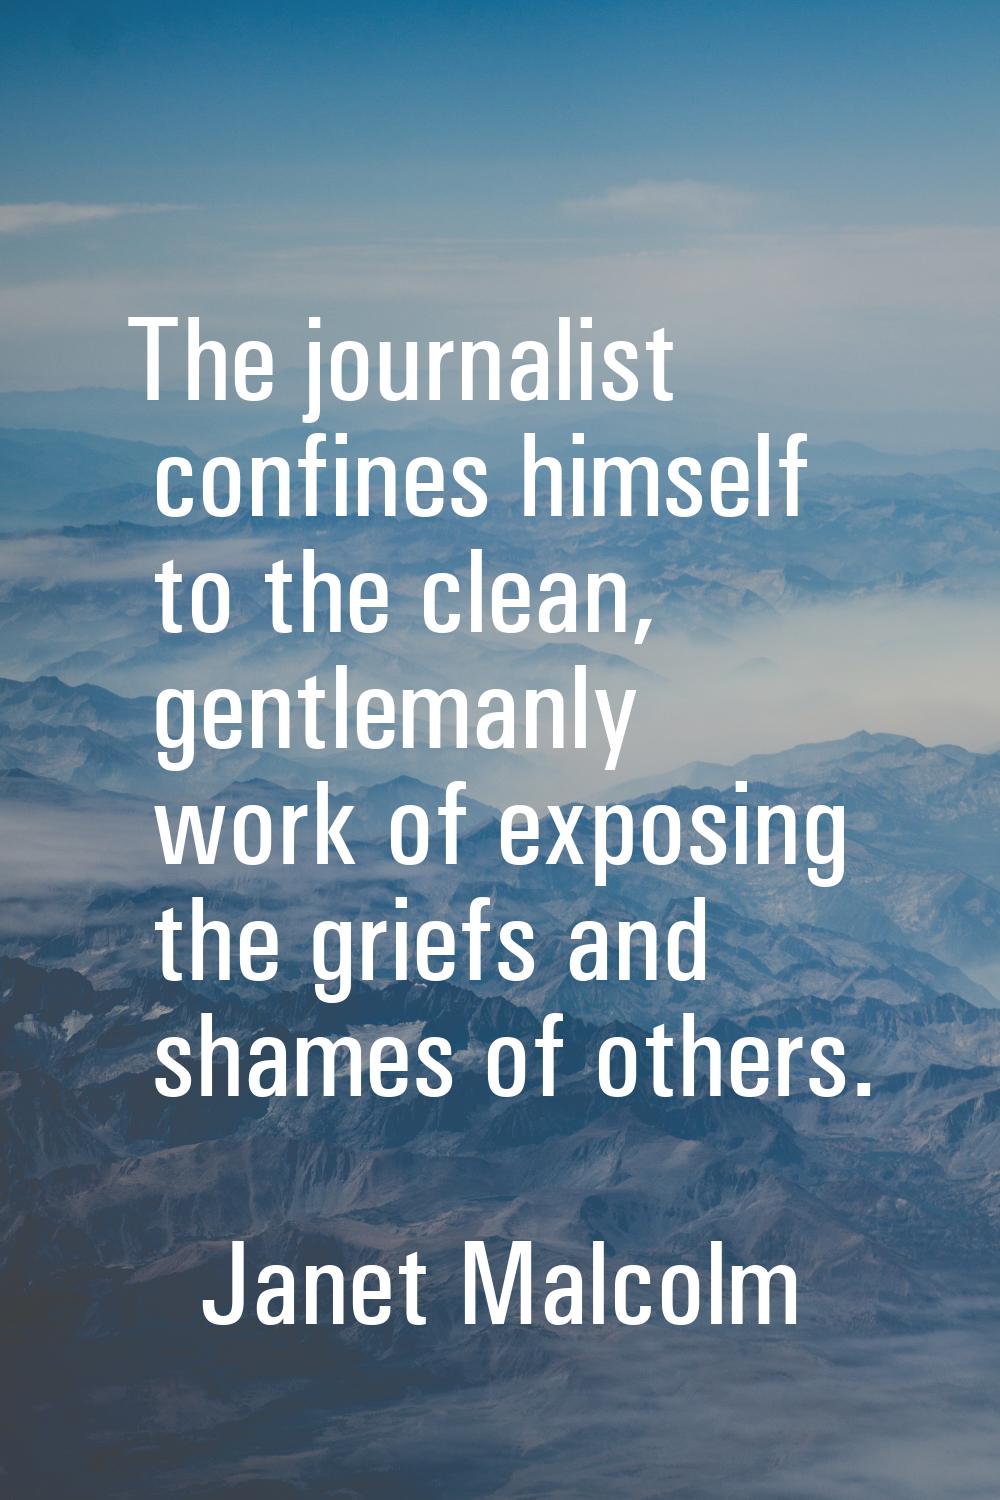 The journalist confines himself to the clean, gentlemanly work of exposing the griefs and shames of